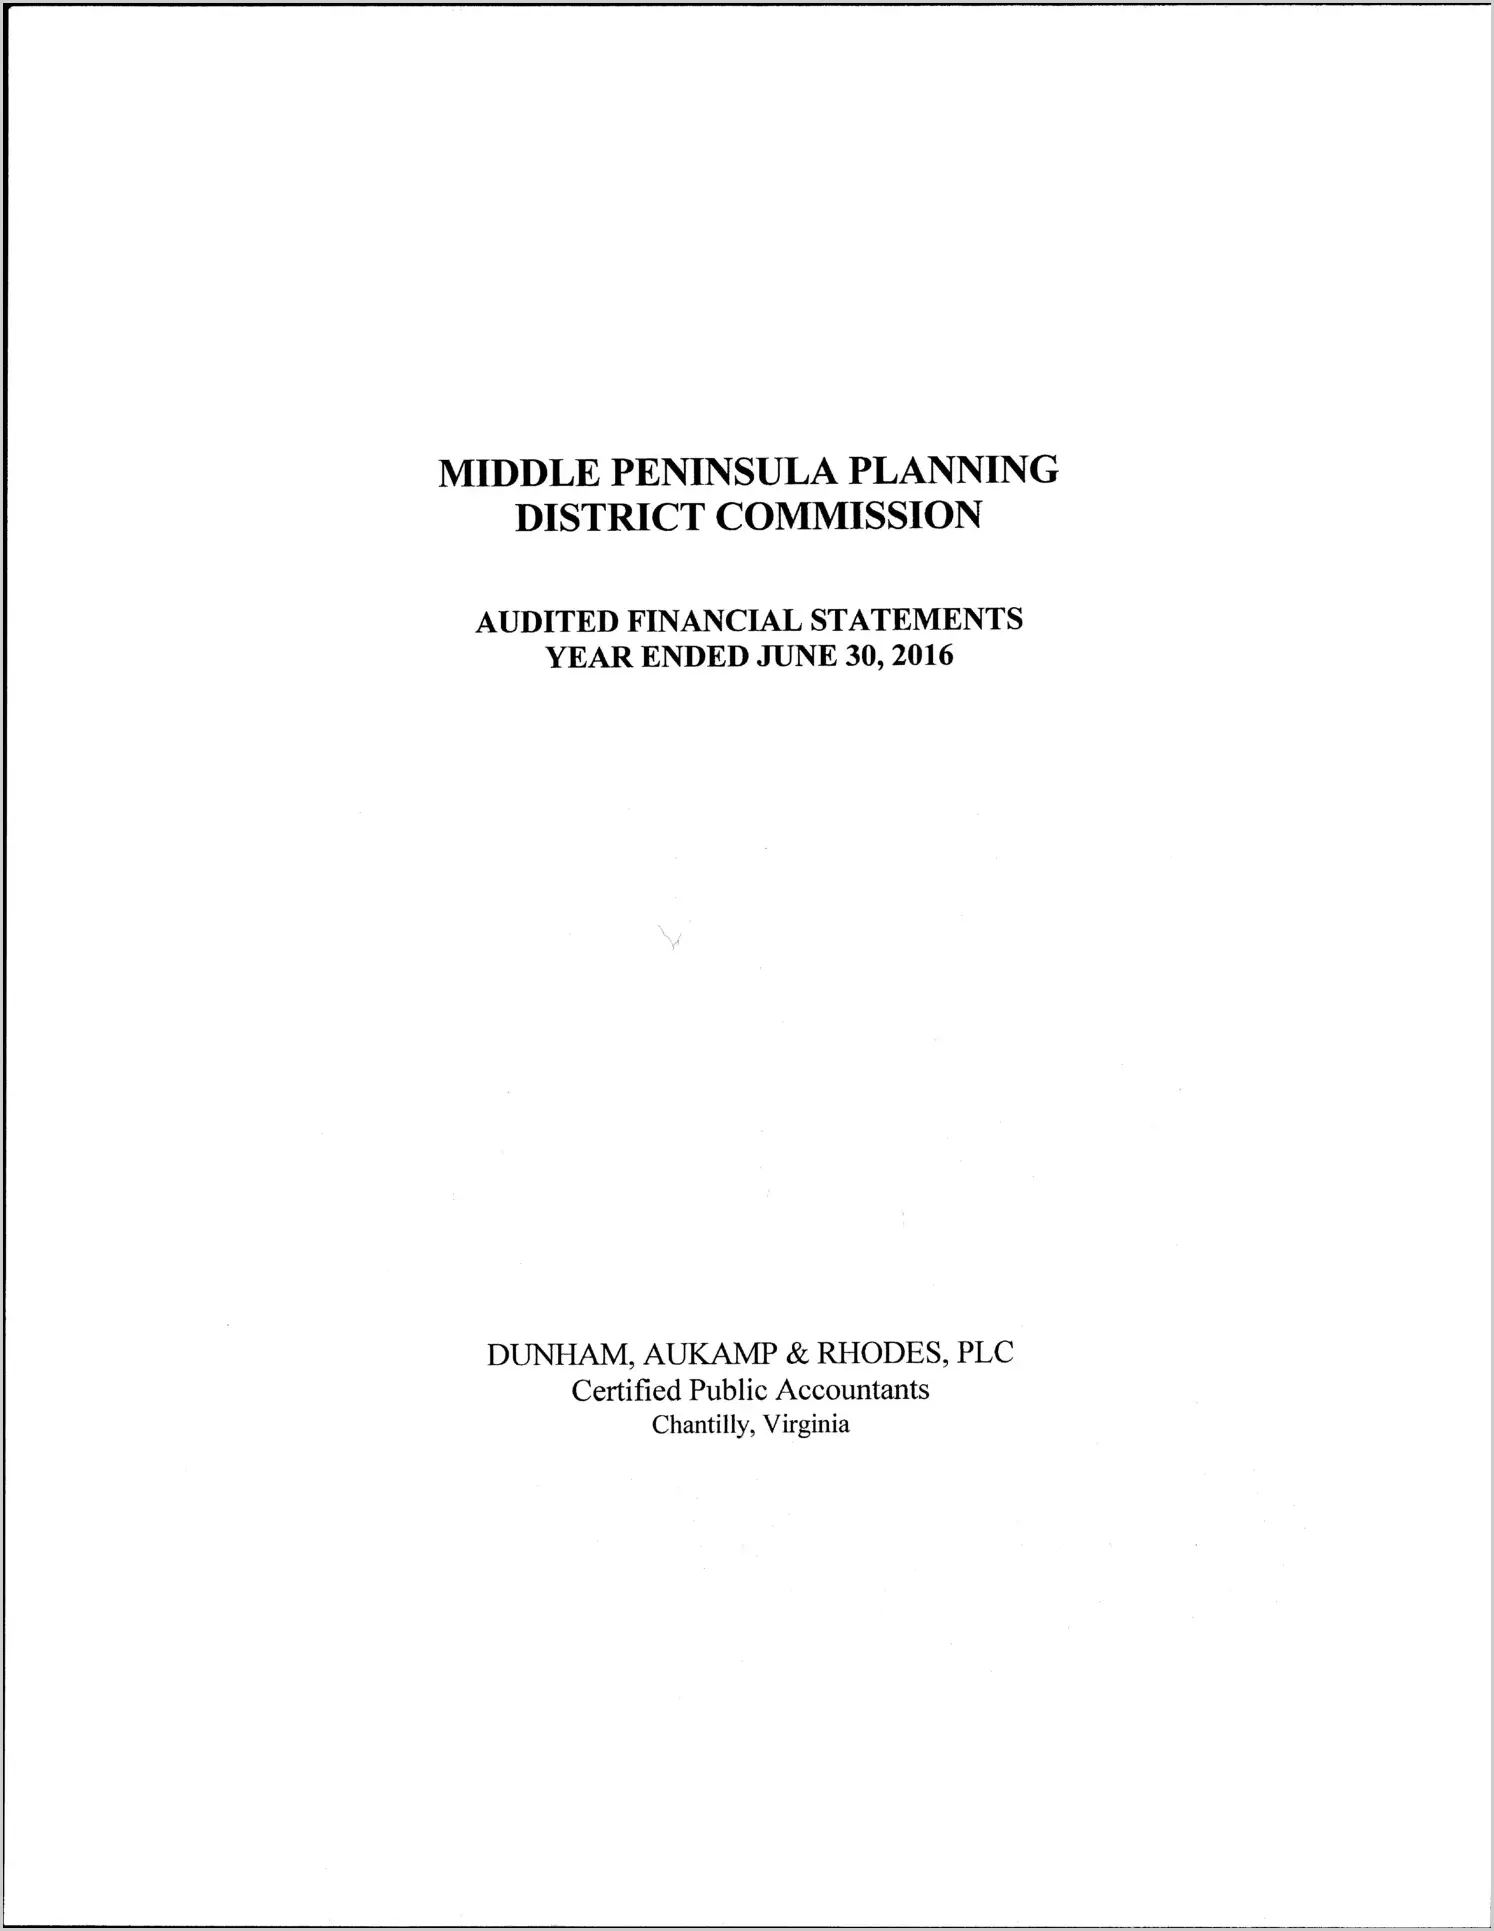 2016 ABC/Other Annual Financial Report  for Middle Peninsula Planning District Commission